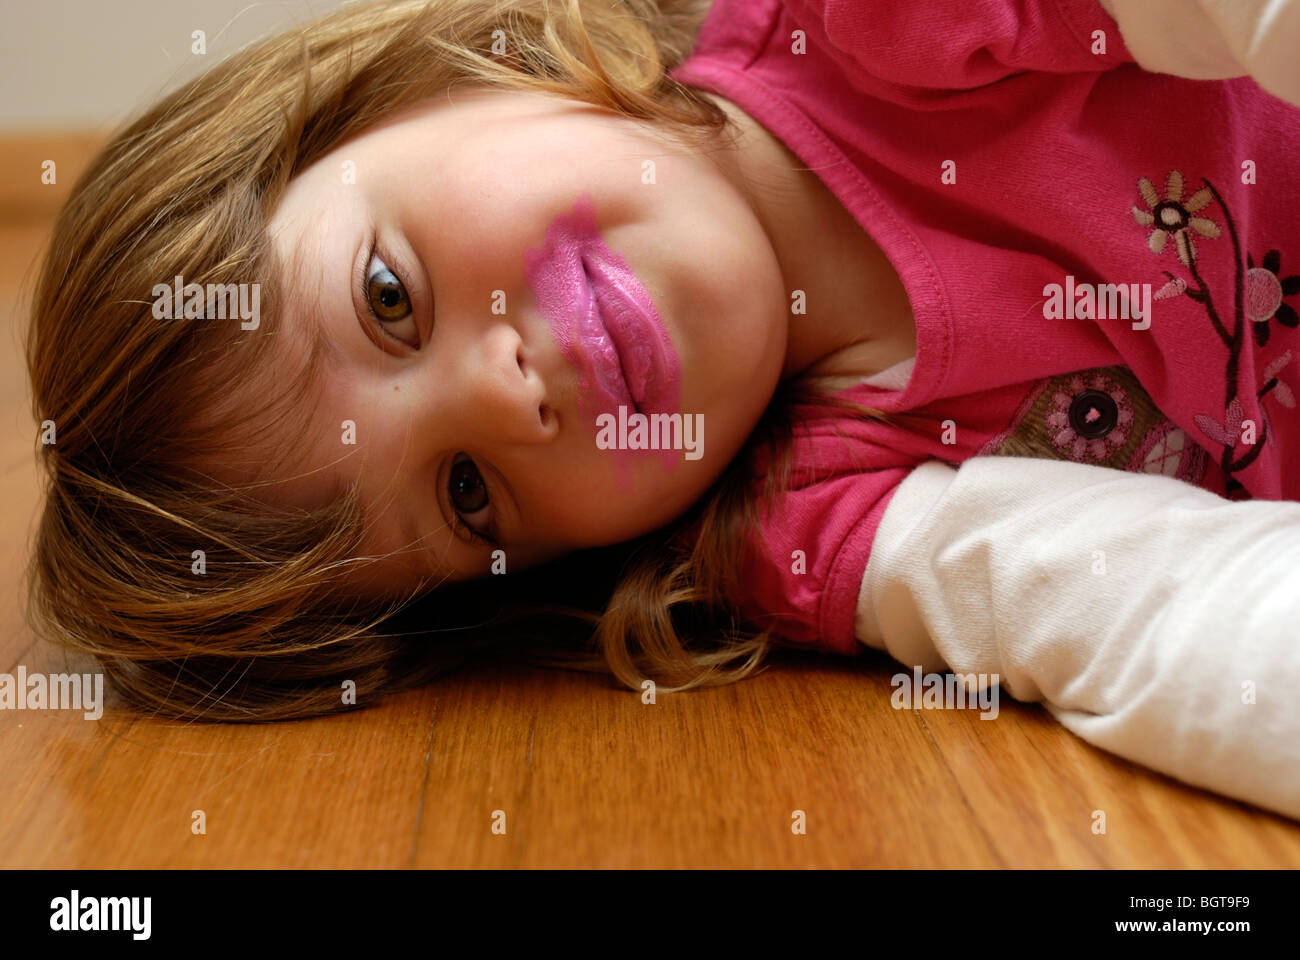 Three year old girl playing with pink lipstick makeup Stock Photo